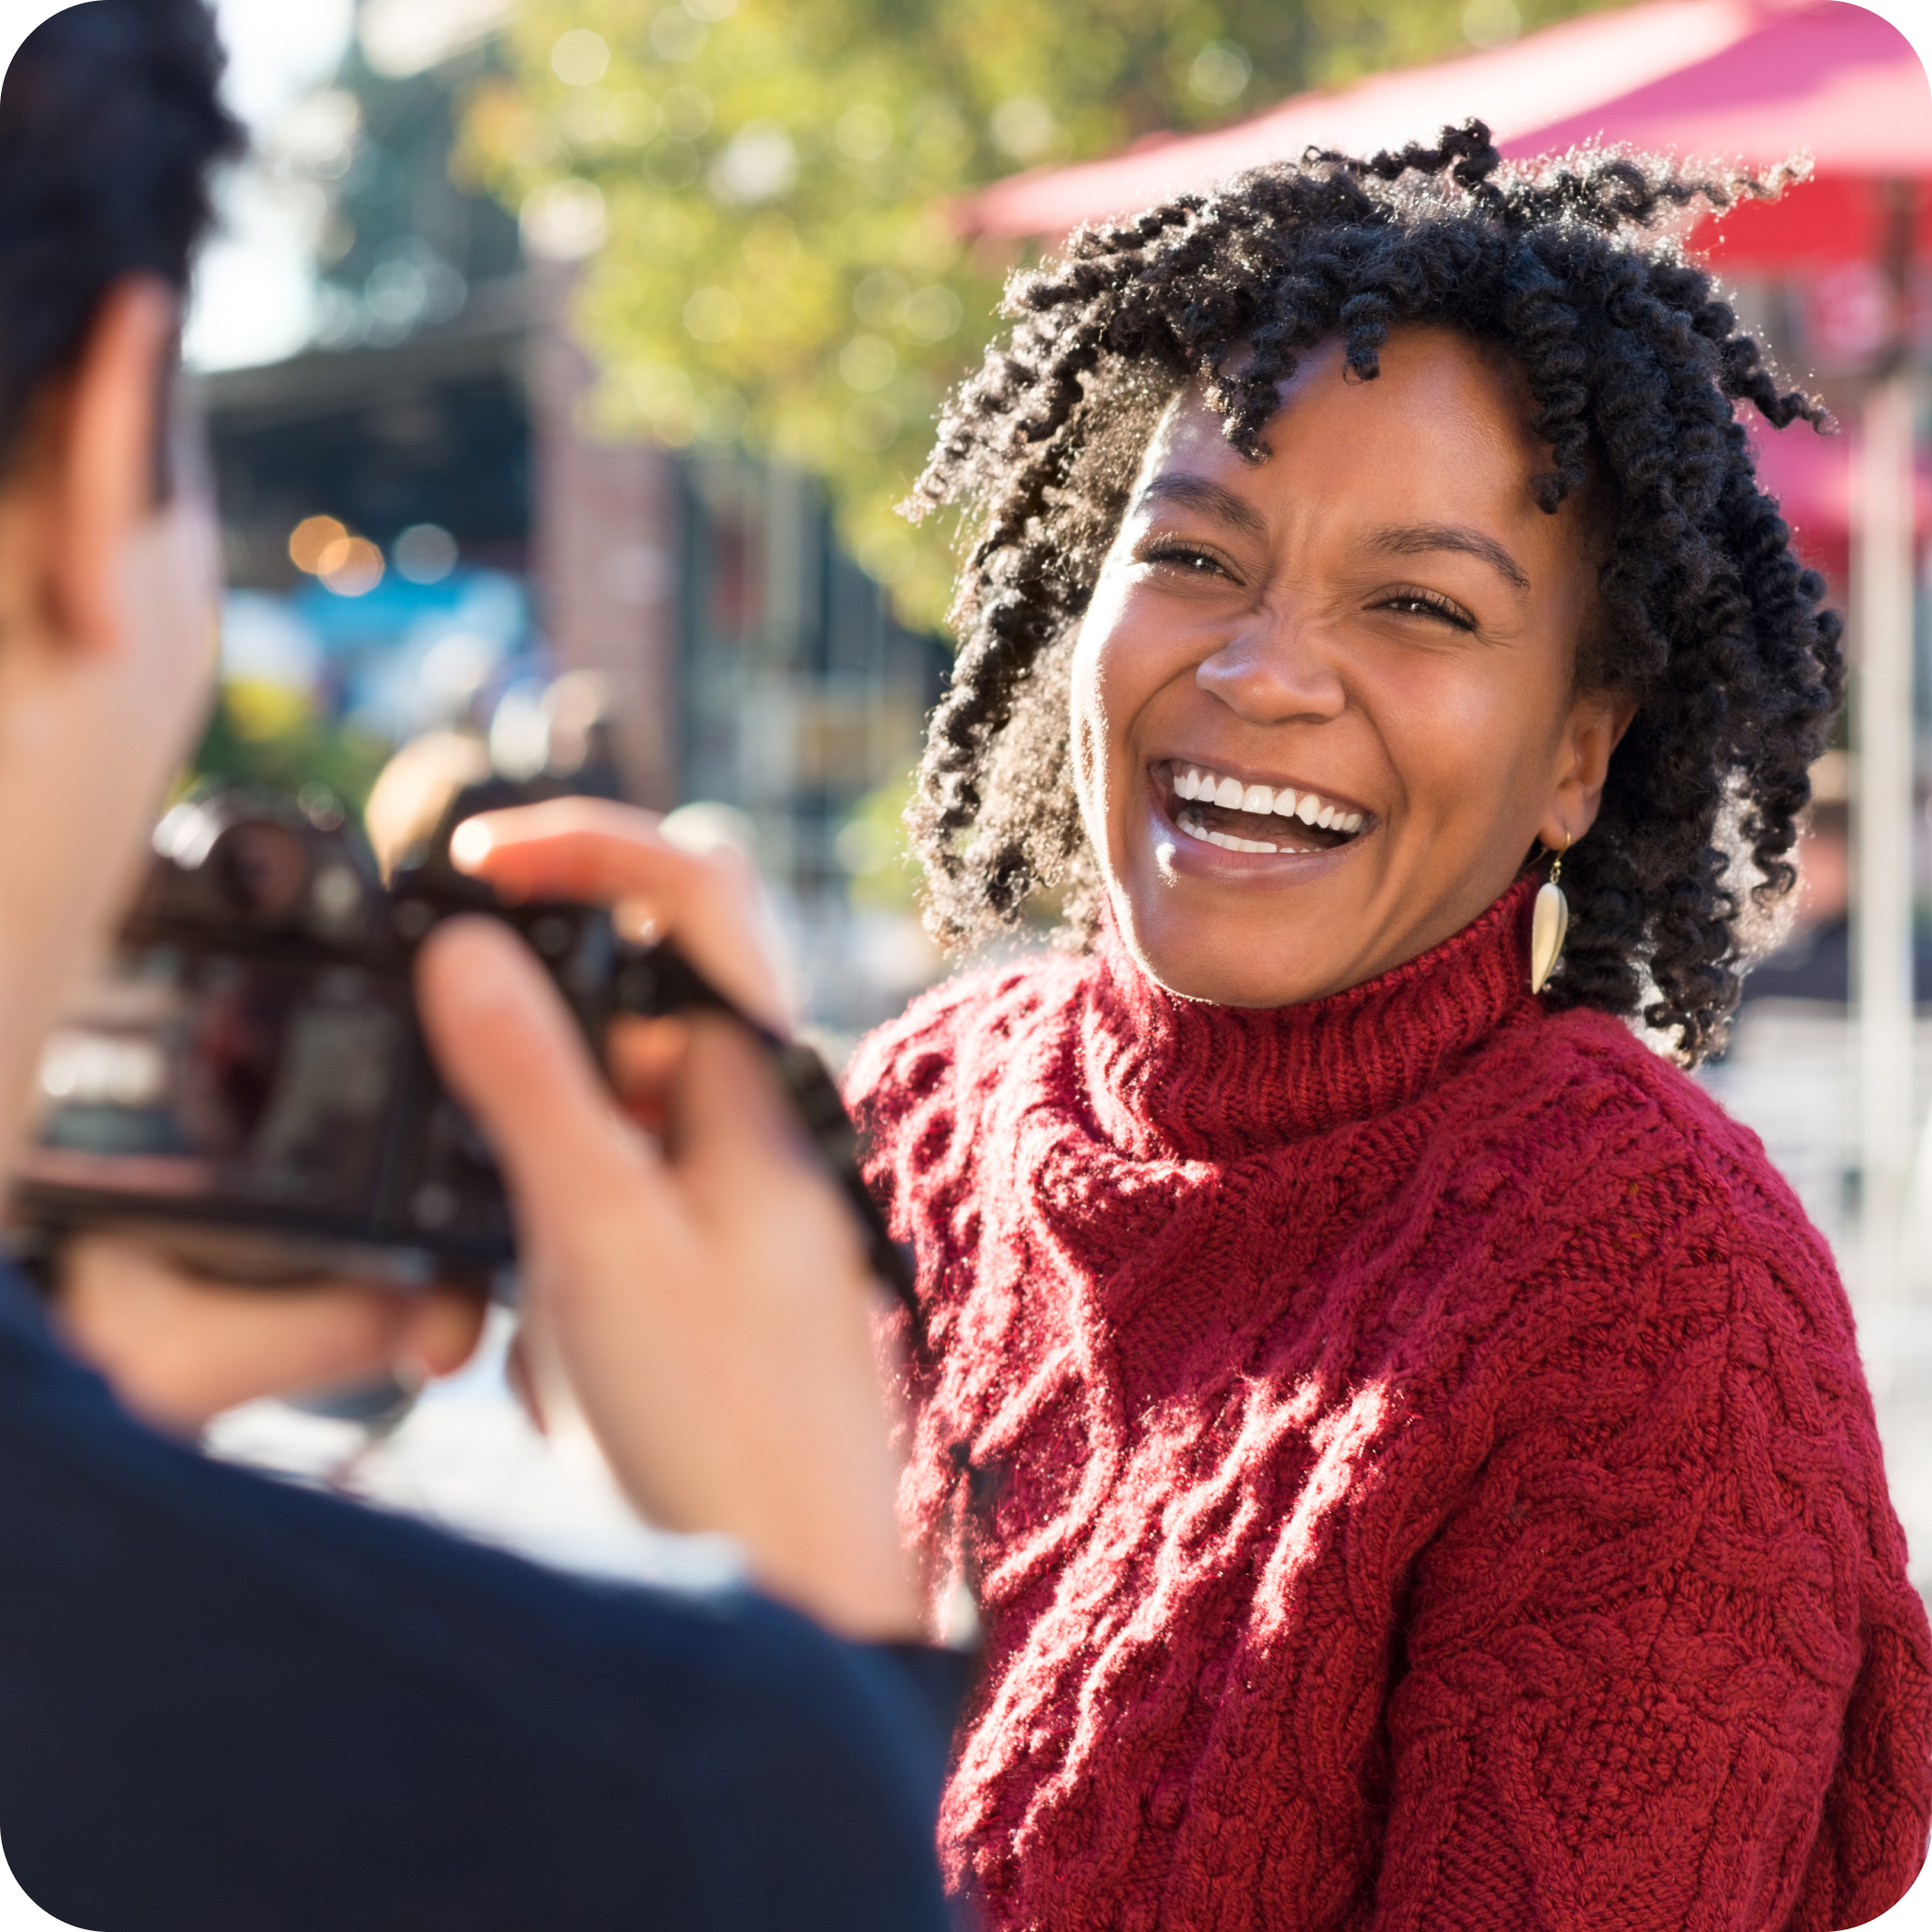 young happy black woman smiling wearing a red sweater getting her online dating photo taken by her photographer